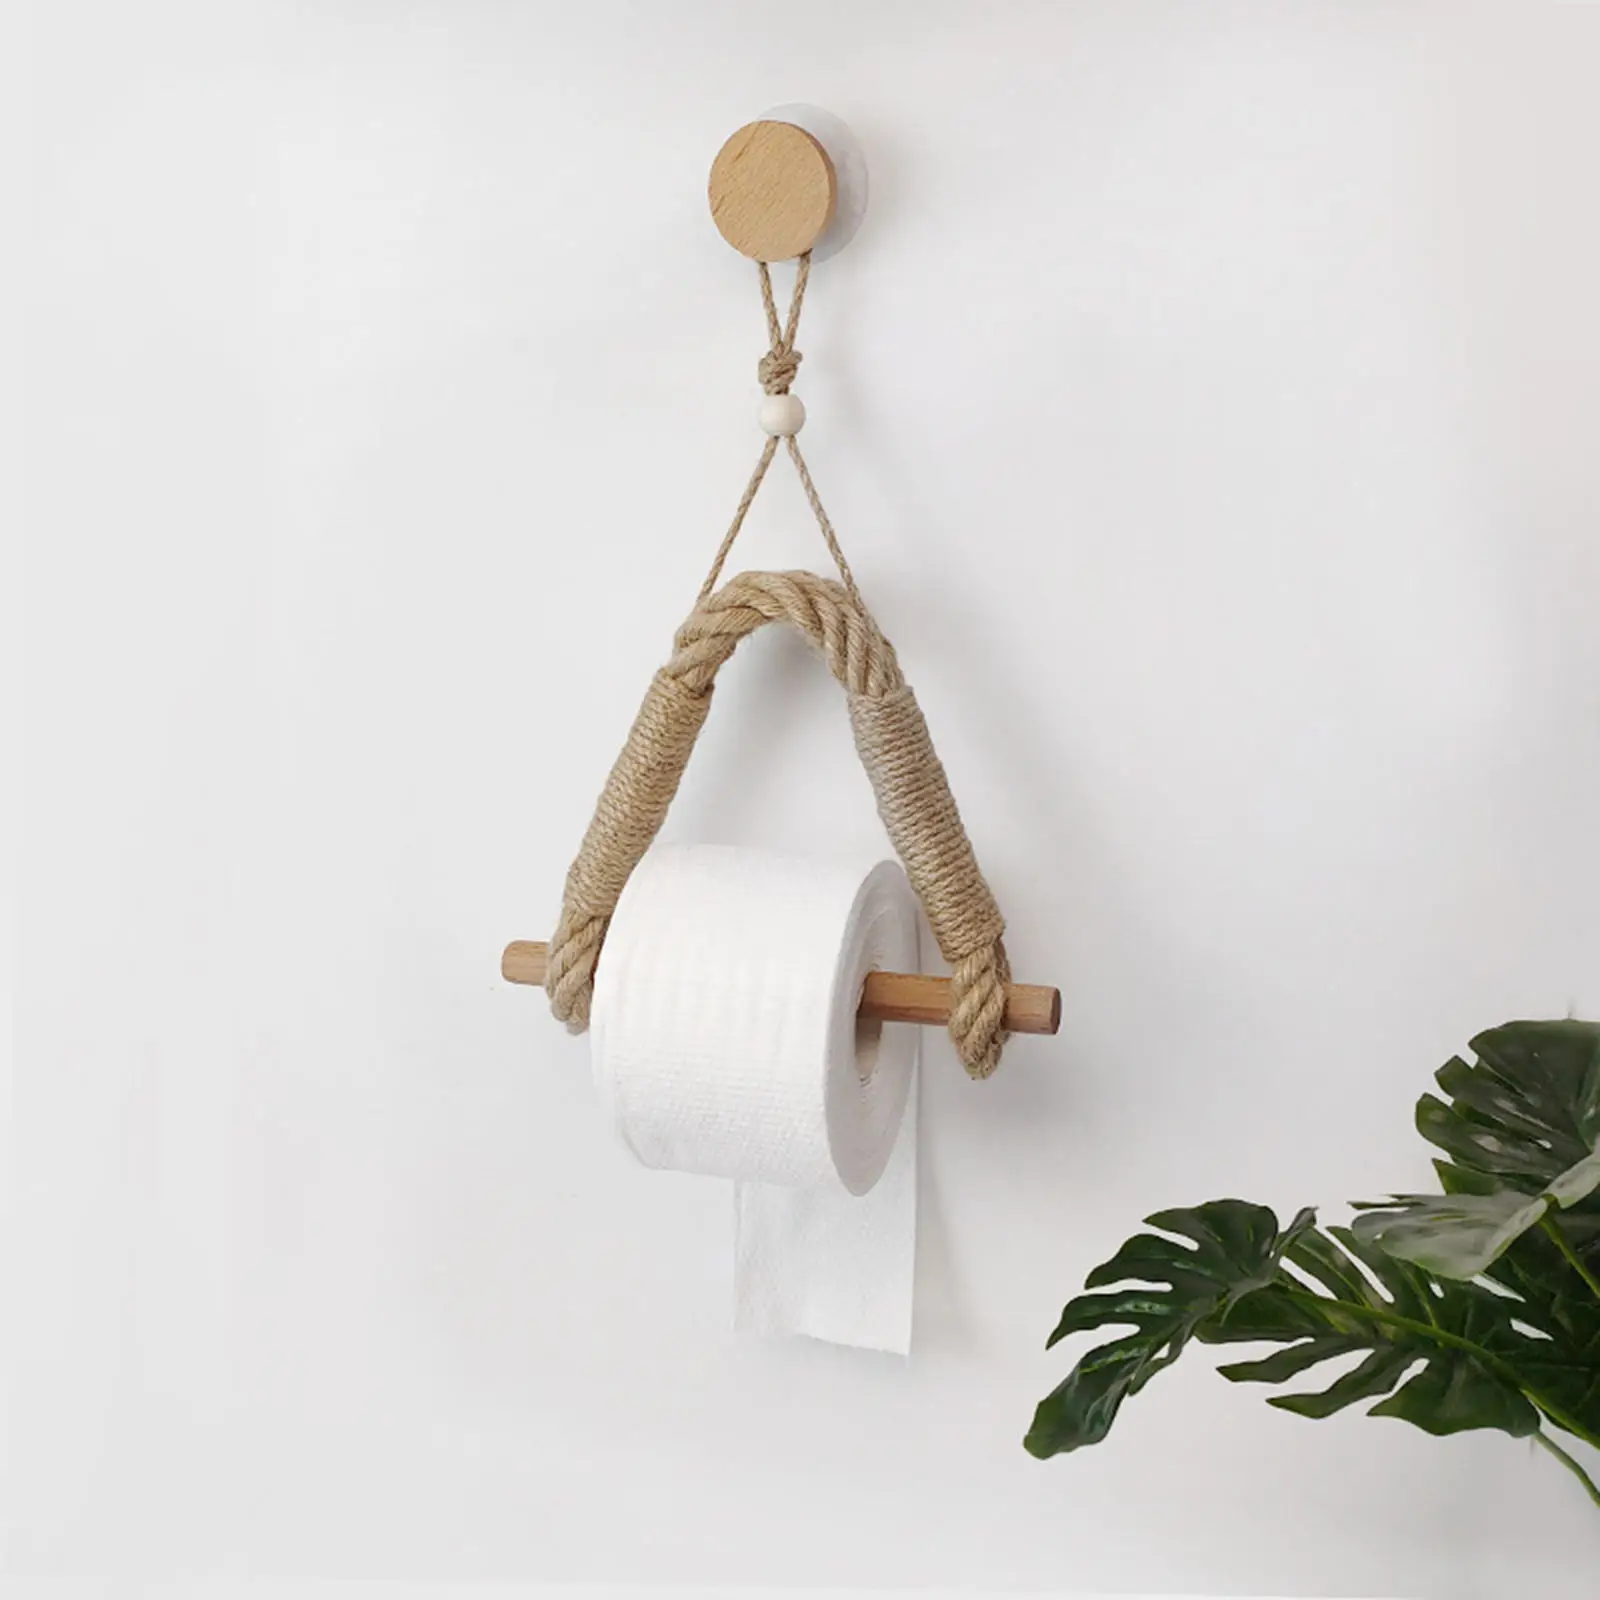 Rolled Toilet Paper Holder for Bathroom Kitchen with Adhesive Wall Hook